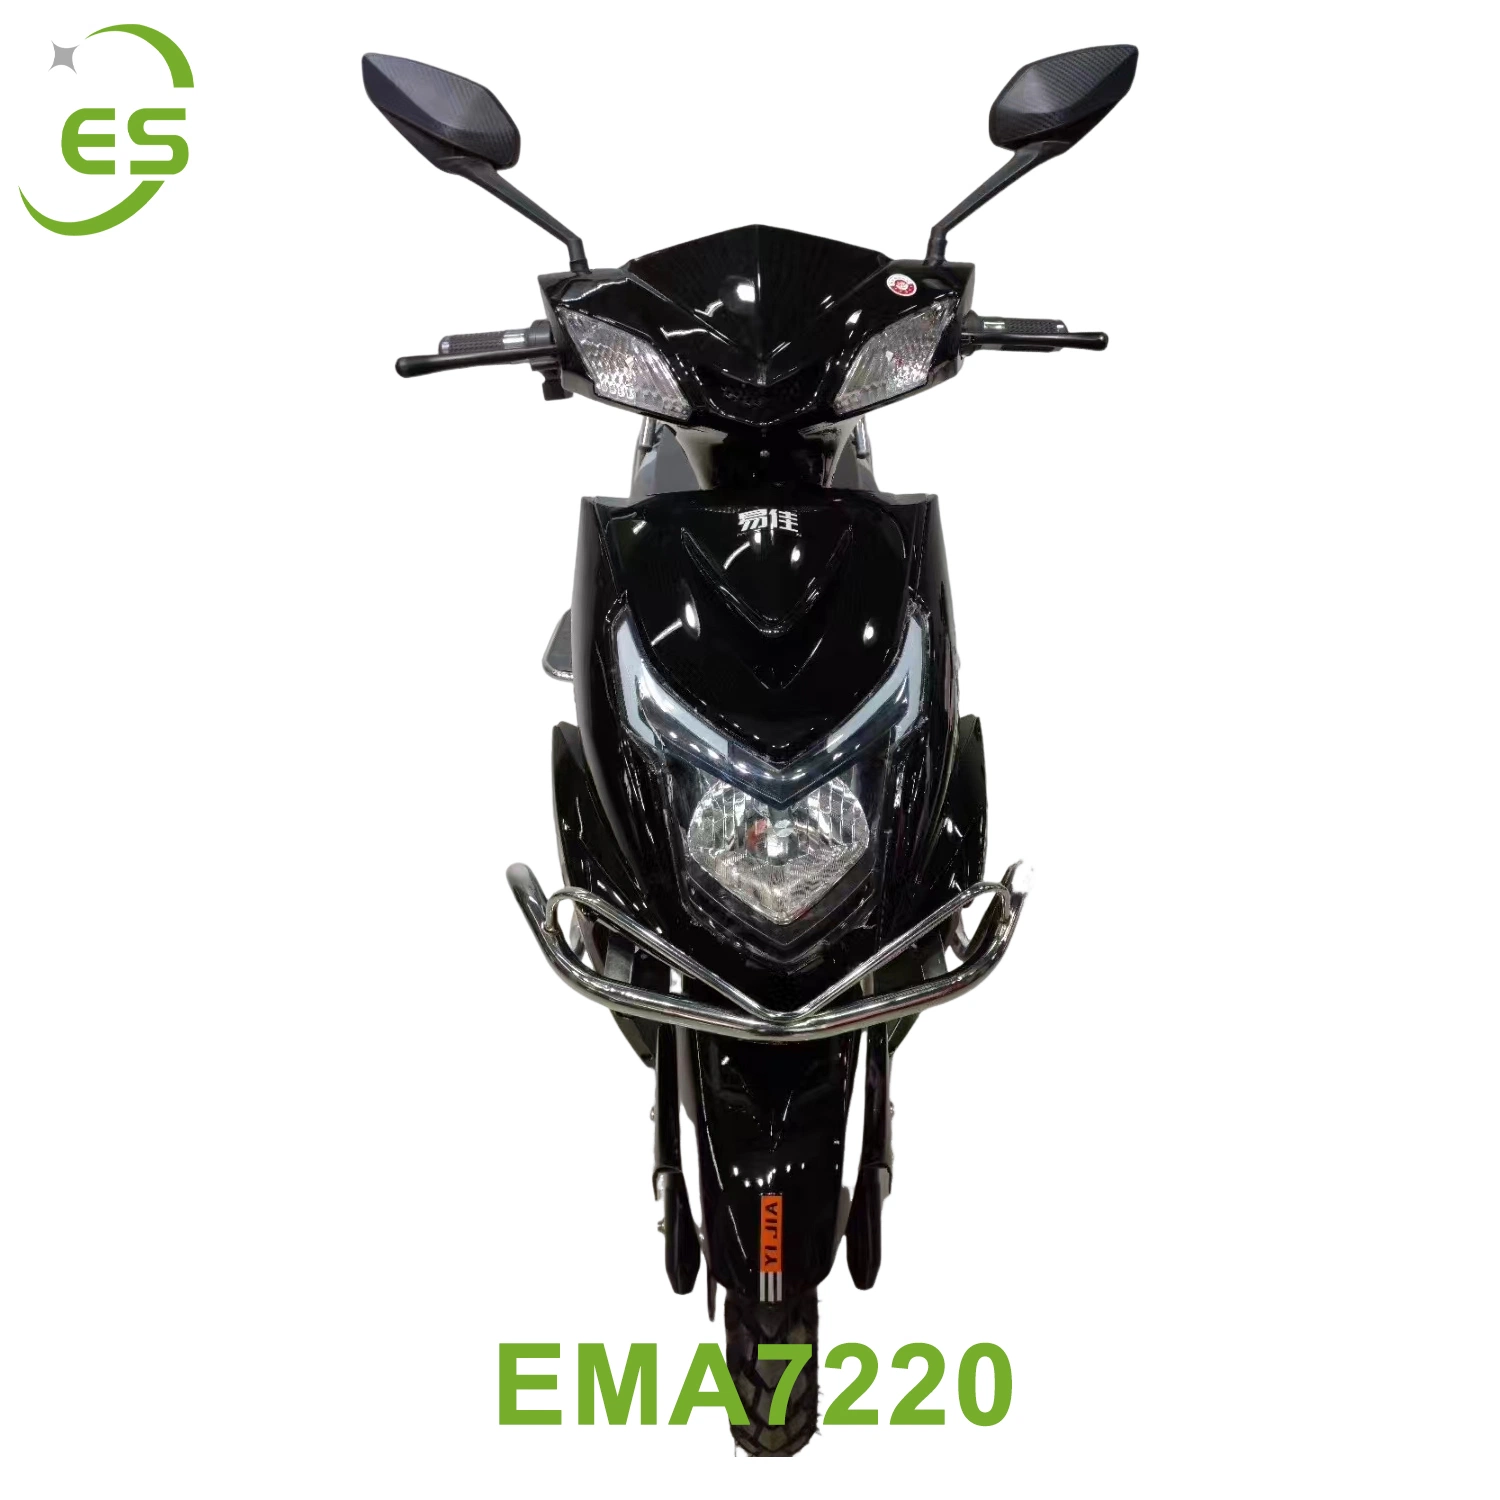 EMA7220 China Price Electric Scooter Electric Motorcycle Factory E-Scooter Hot Sale